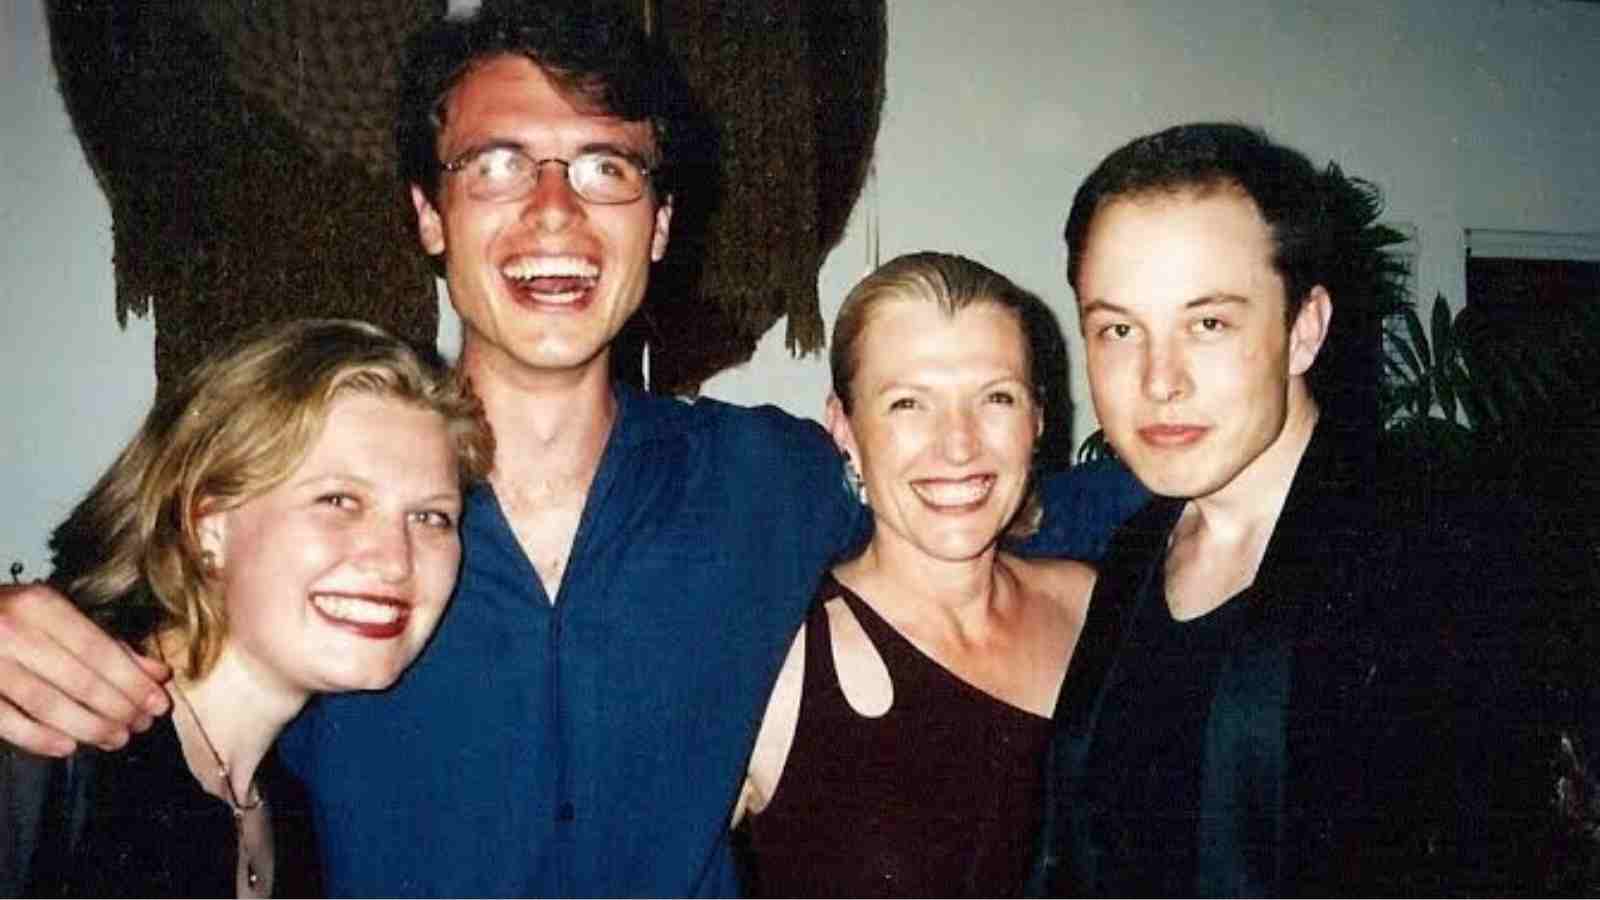 Elon Musk with his family